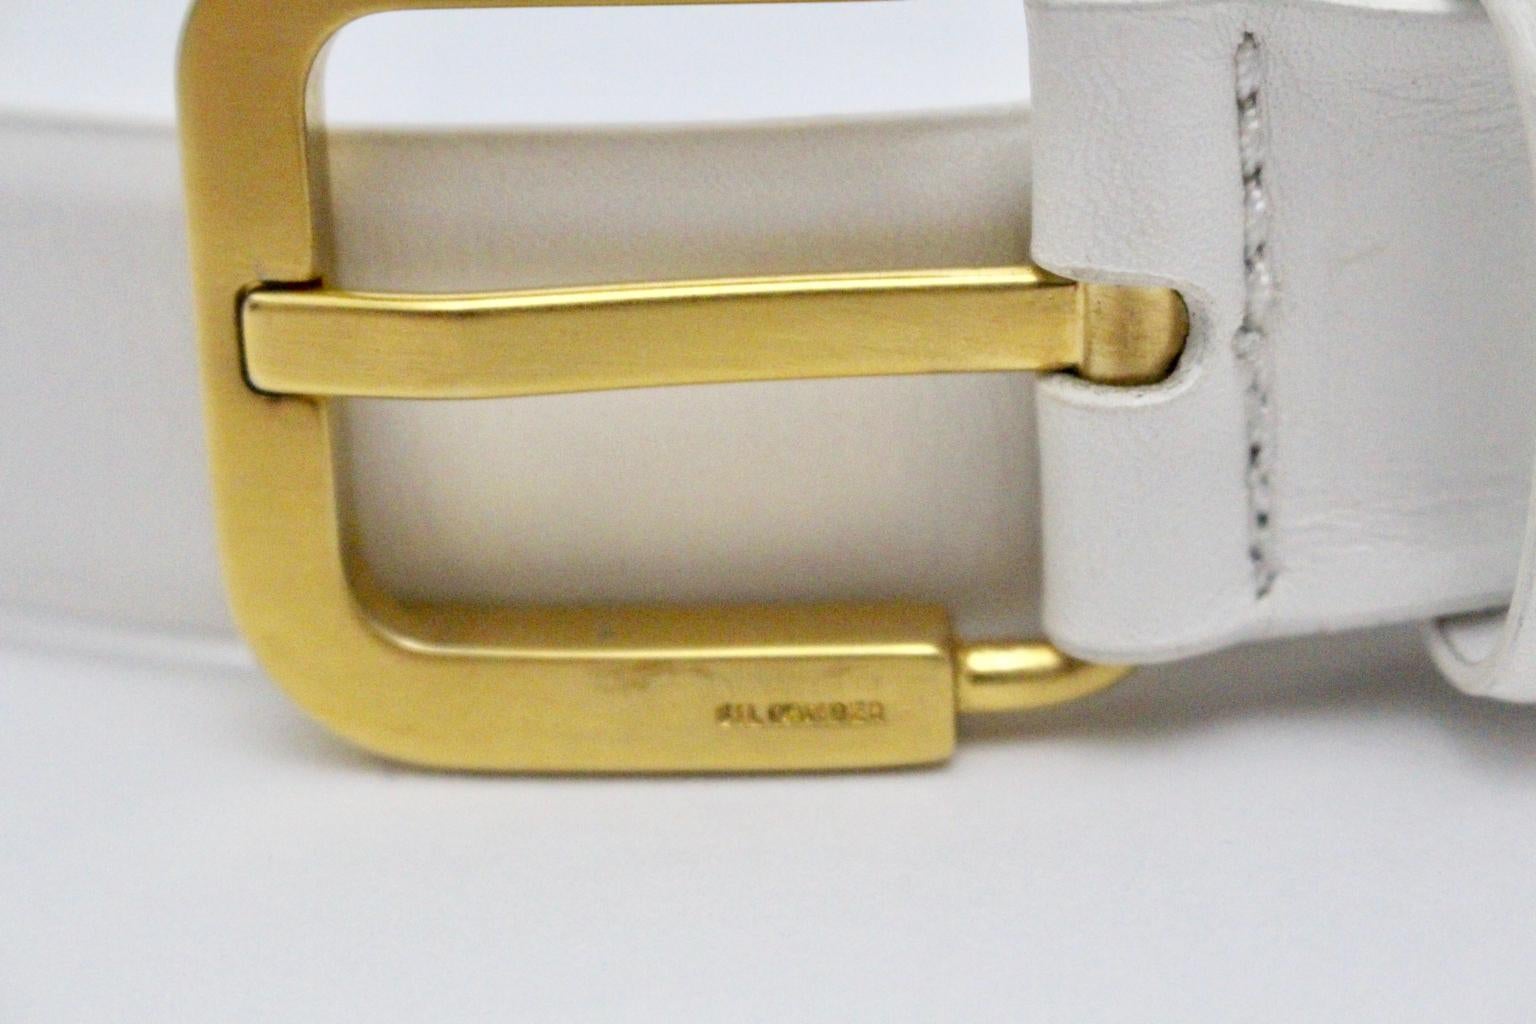 Jil Sander Vintage White Leather Belt Size 70 In Good Condition For Sale In Vienna, AT